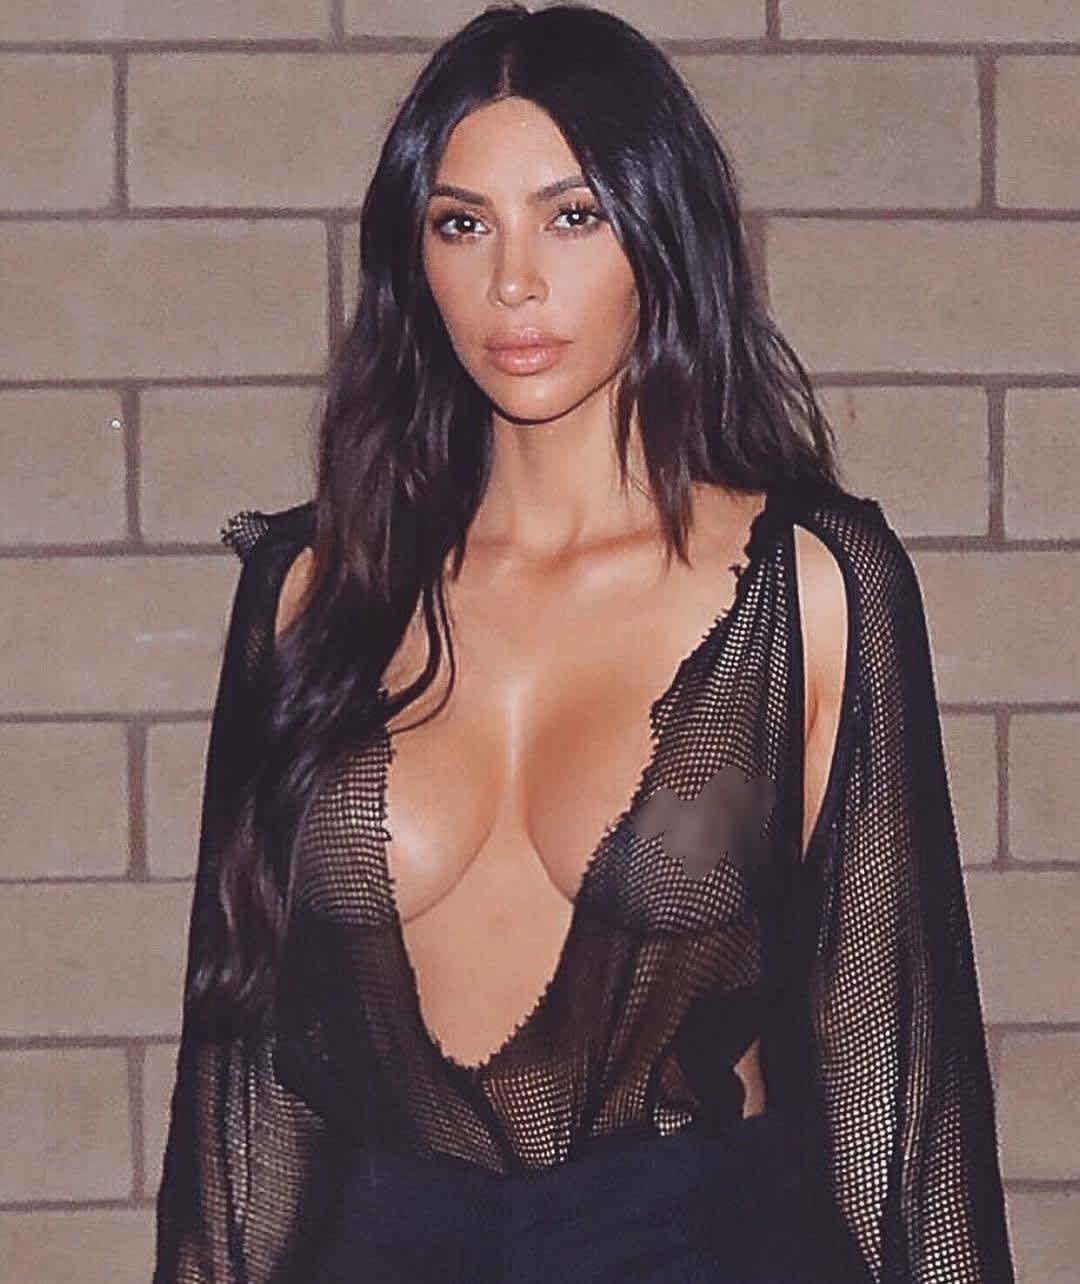 Only Kim can make a tattered fishnet top look so fashionable.